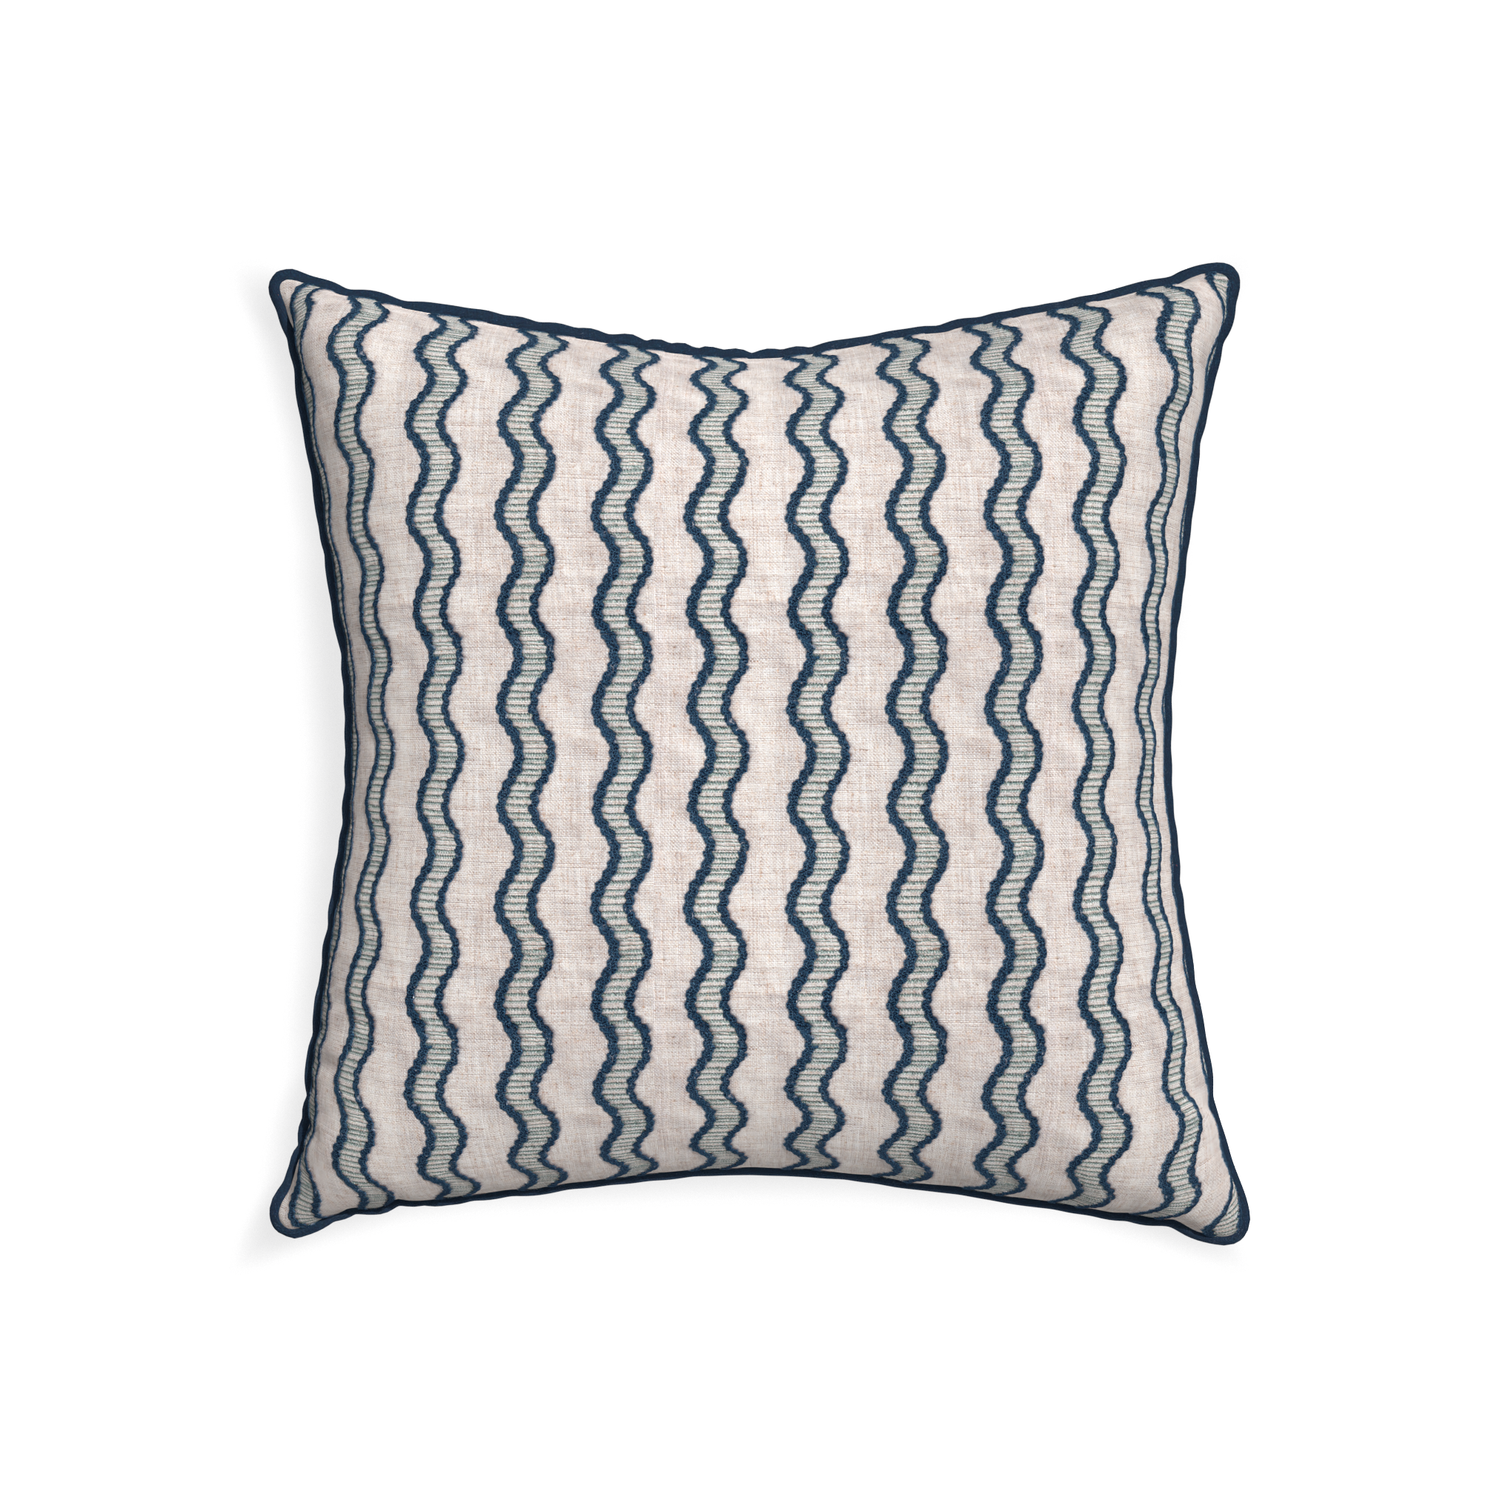 22-square beatrice custom embroidered wavepillow with c piping on white background